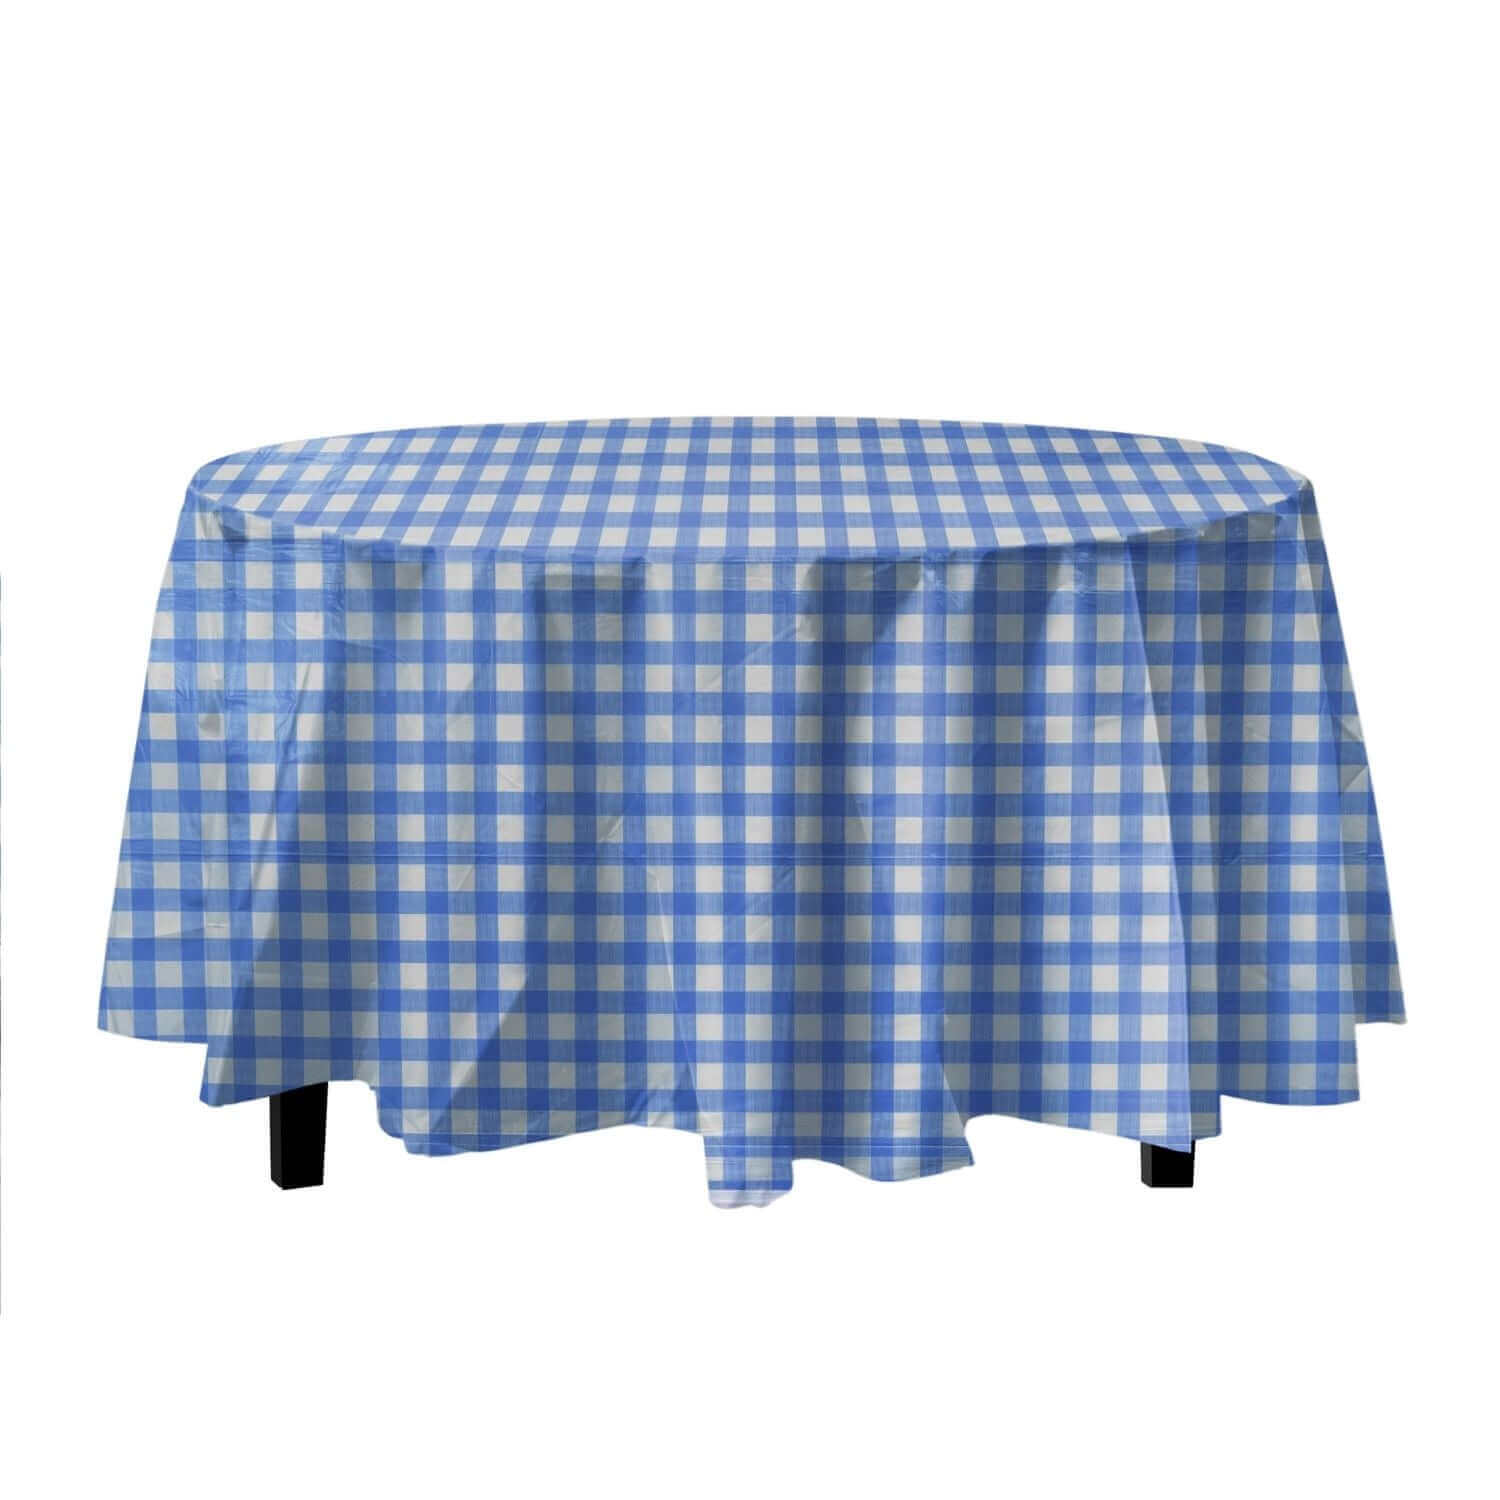 Blue Gingham Printed Plastic Round Tablecloth | 48 Count